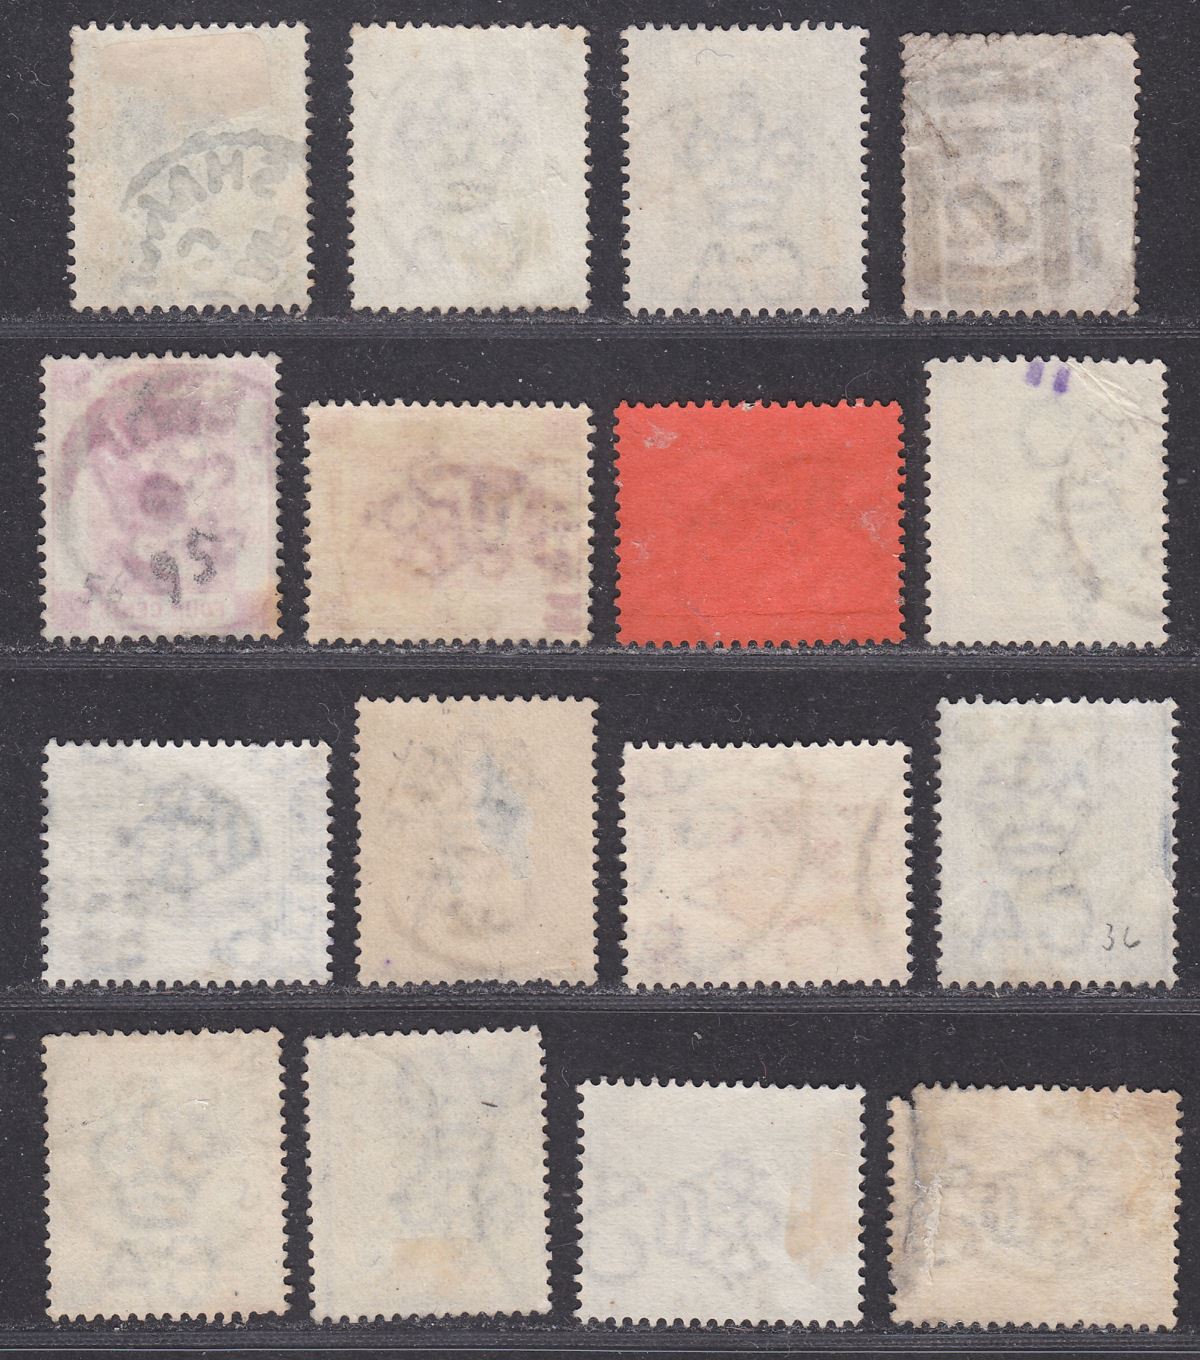 Hong Kong QV-KEVII Selection Used with SHANGHAI Postmarks